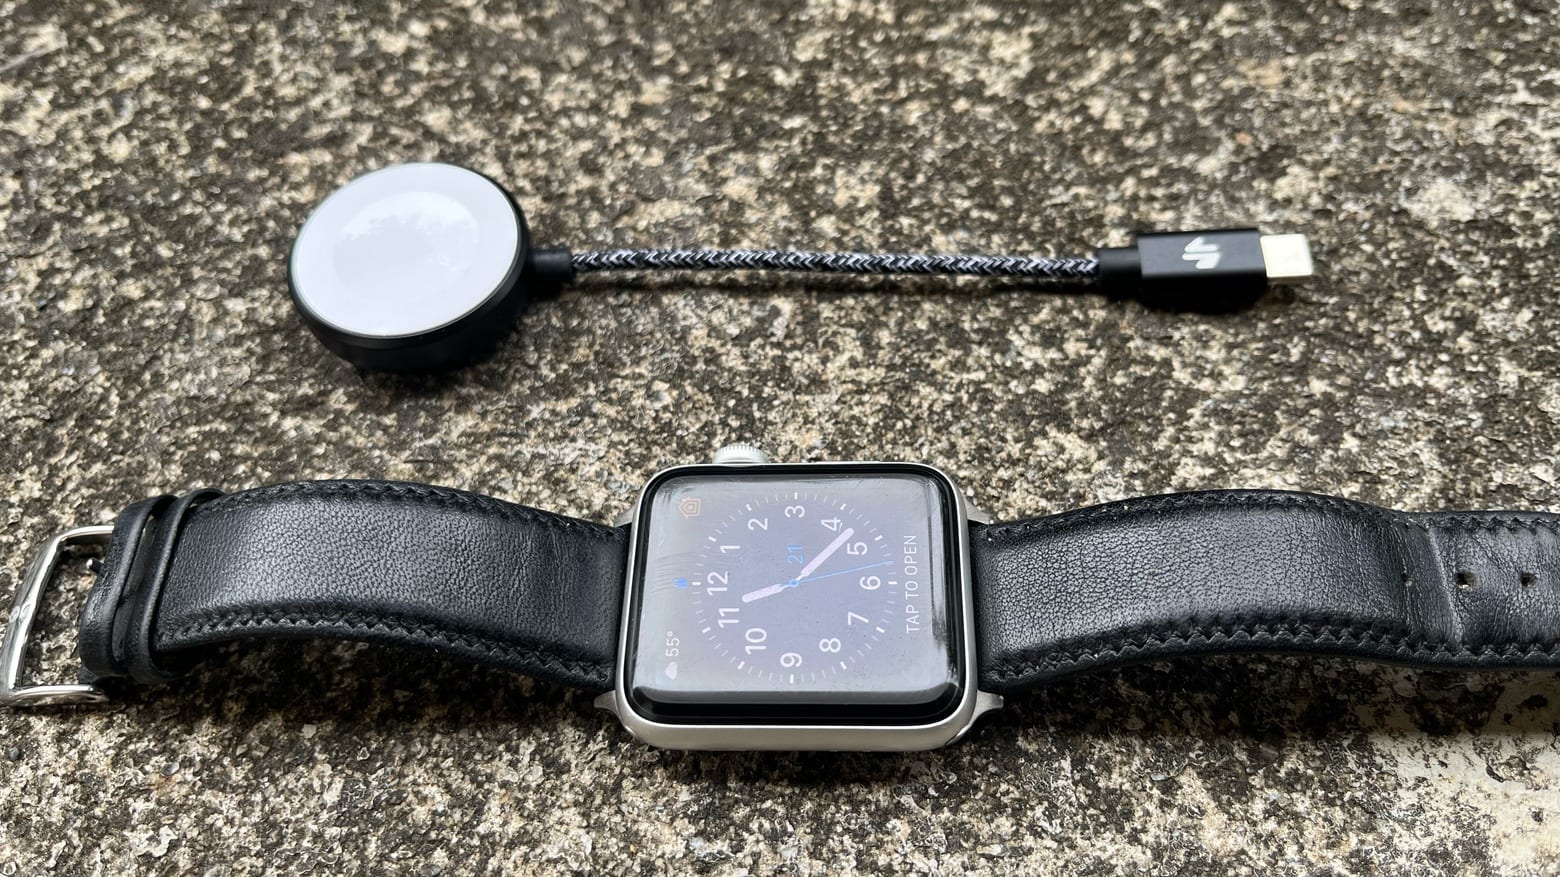 Ampere Apple Watch Charging Cable review: compact travel charger